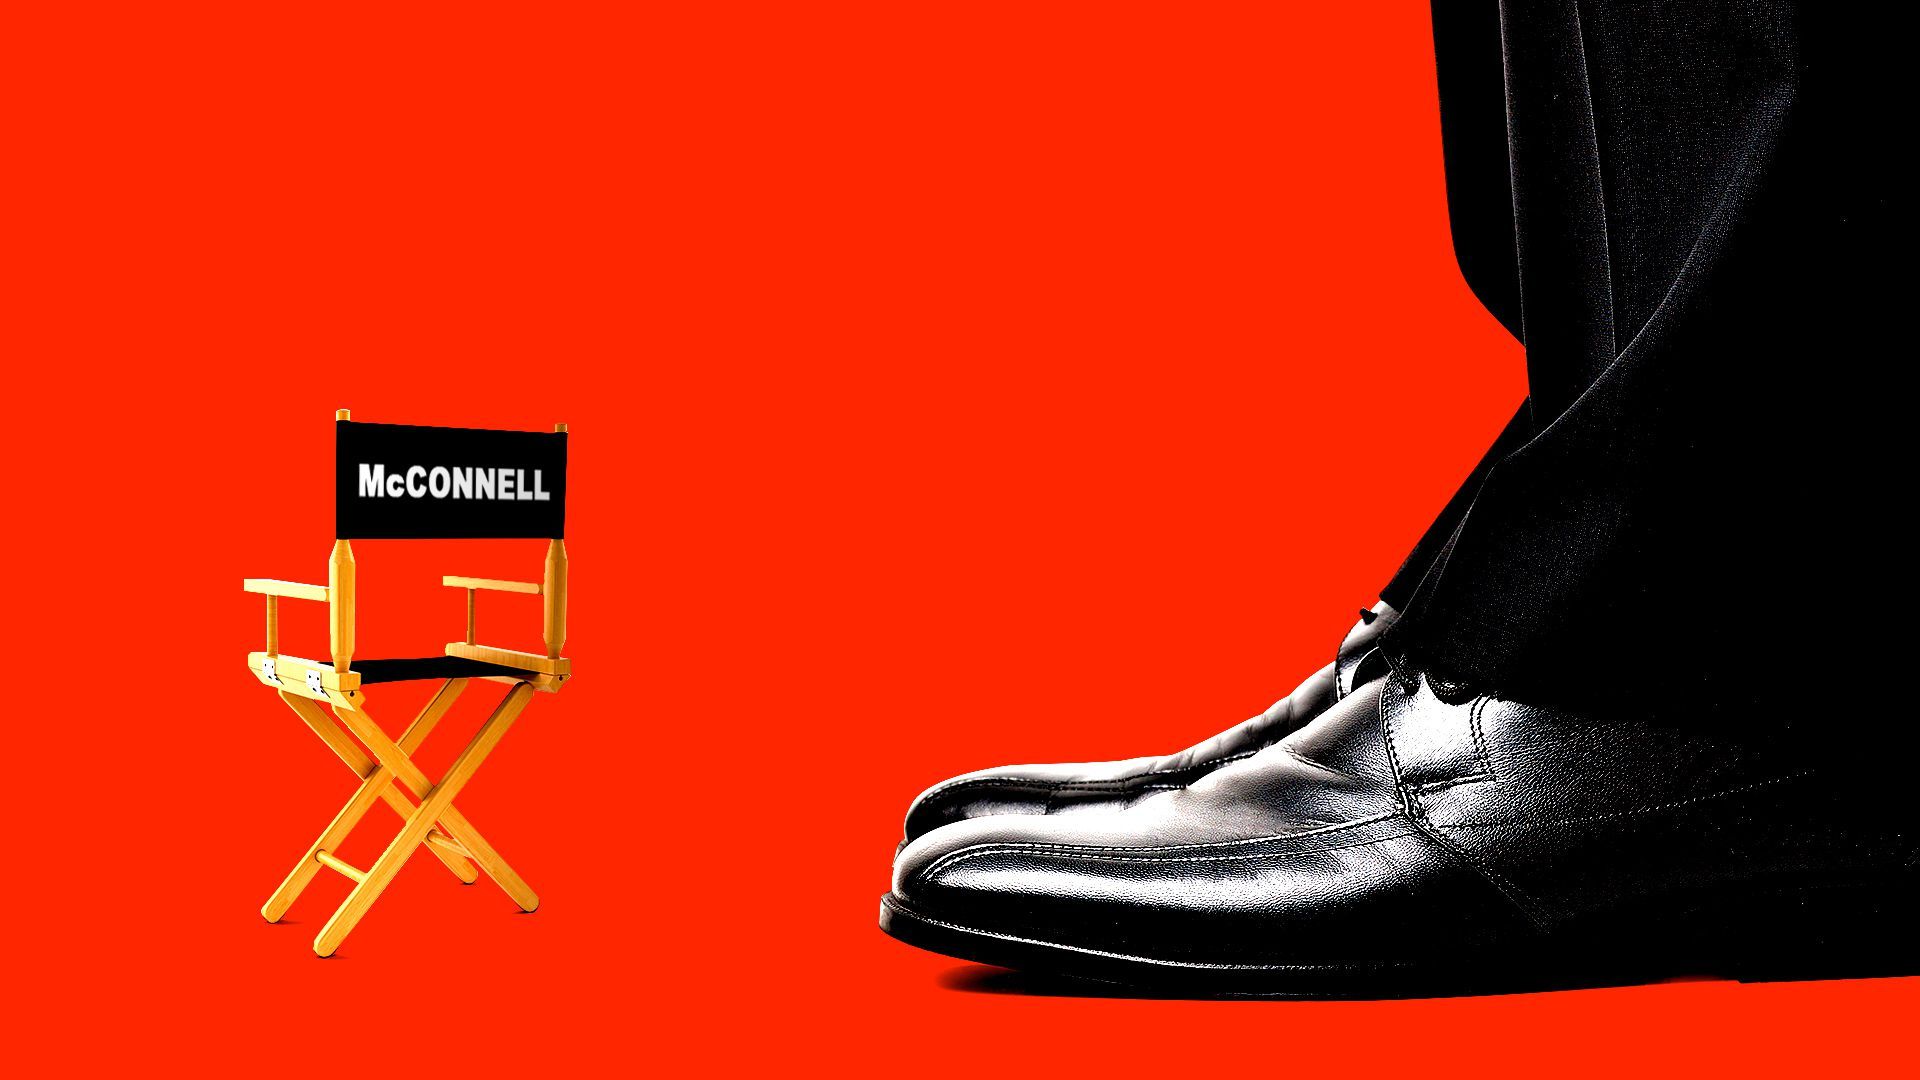 Illustration of a tiny director's chair with "McCONNELL" written on the back, next to a cropped cut of a giant person in a suit. 